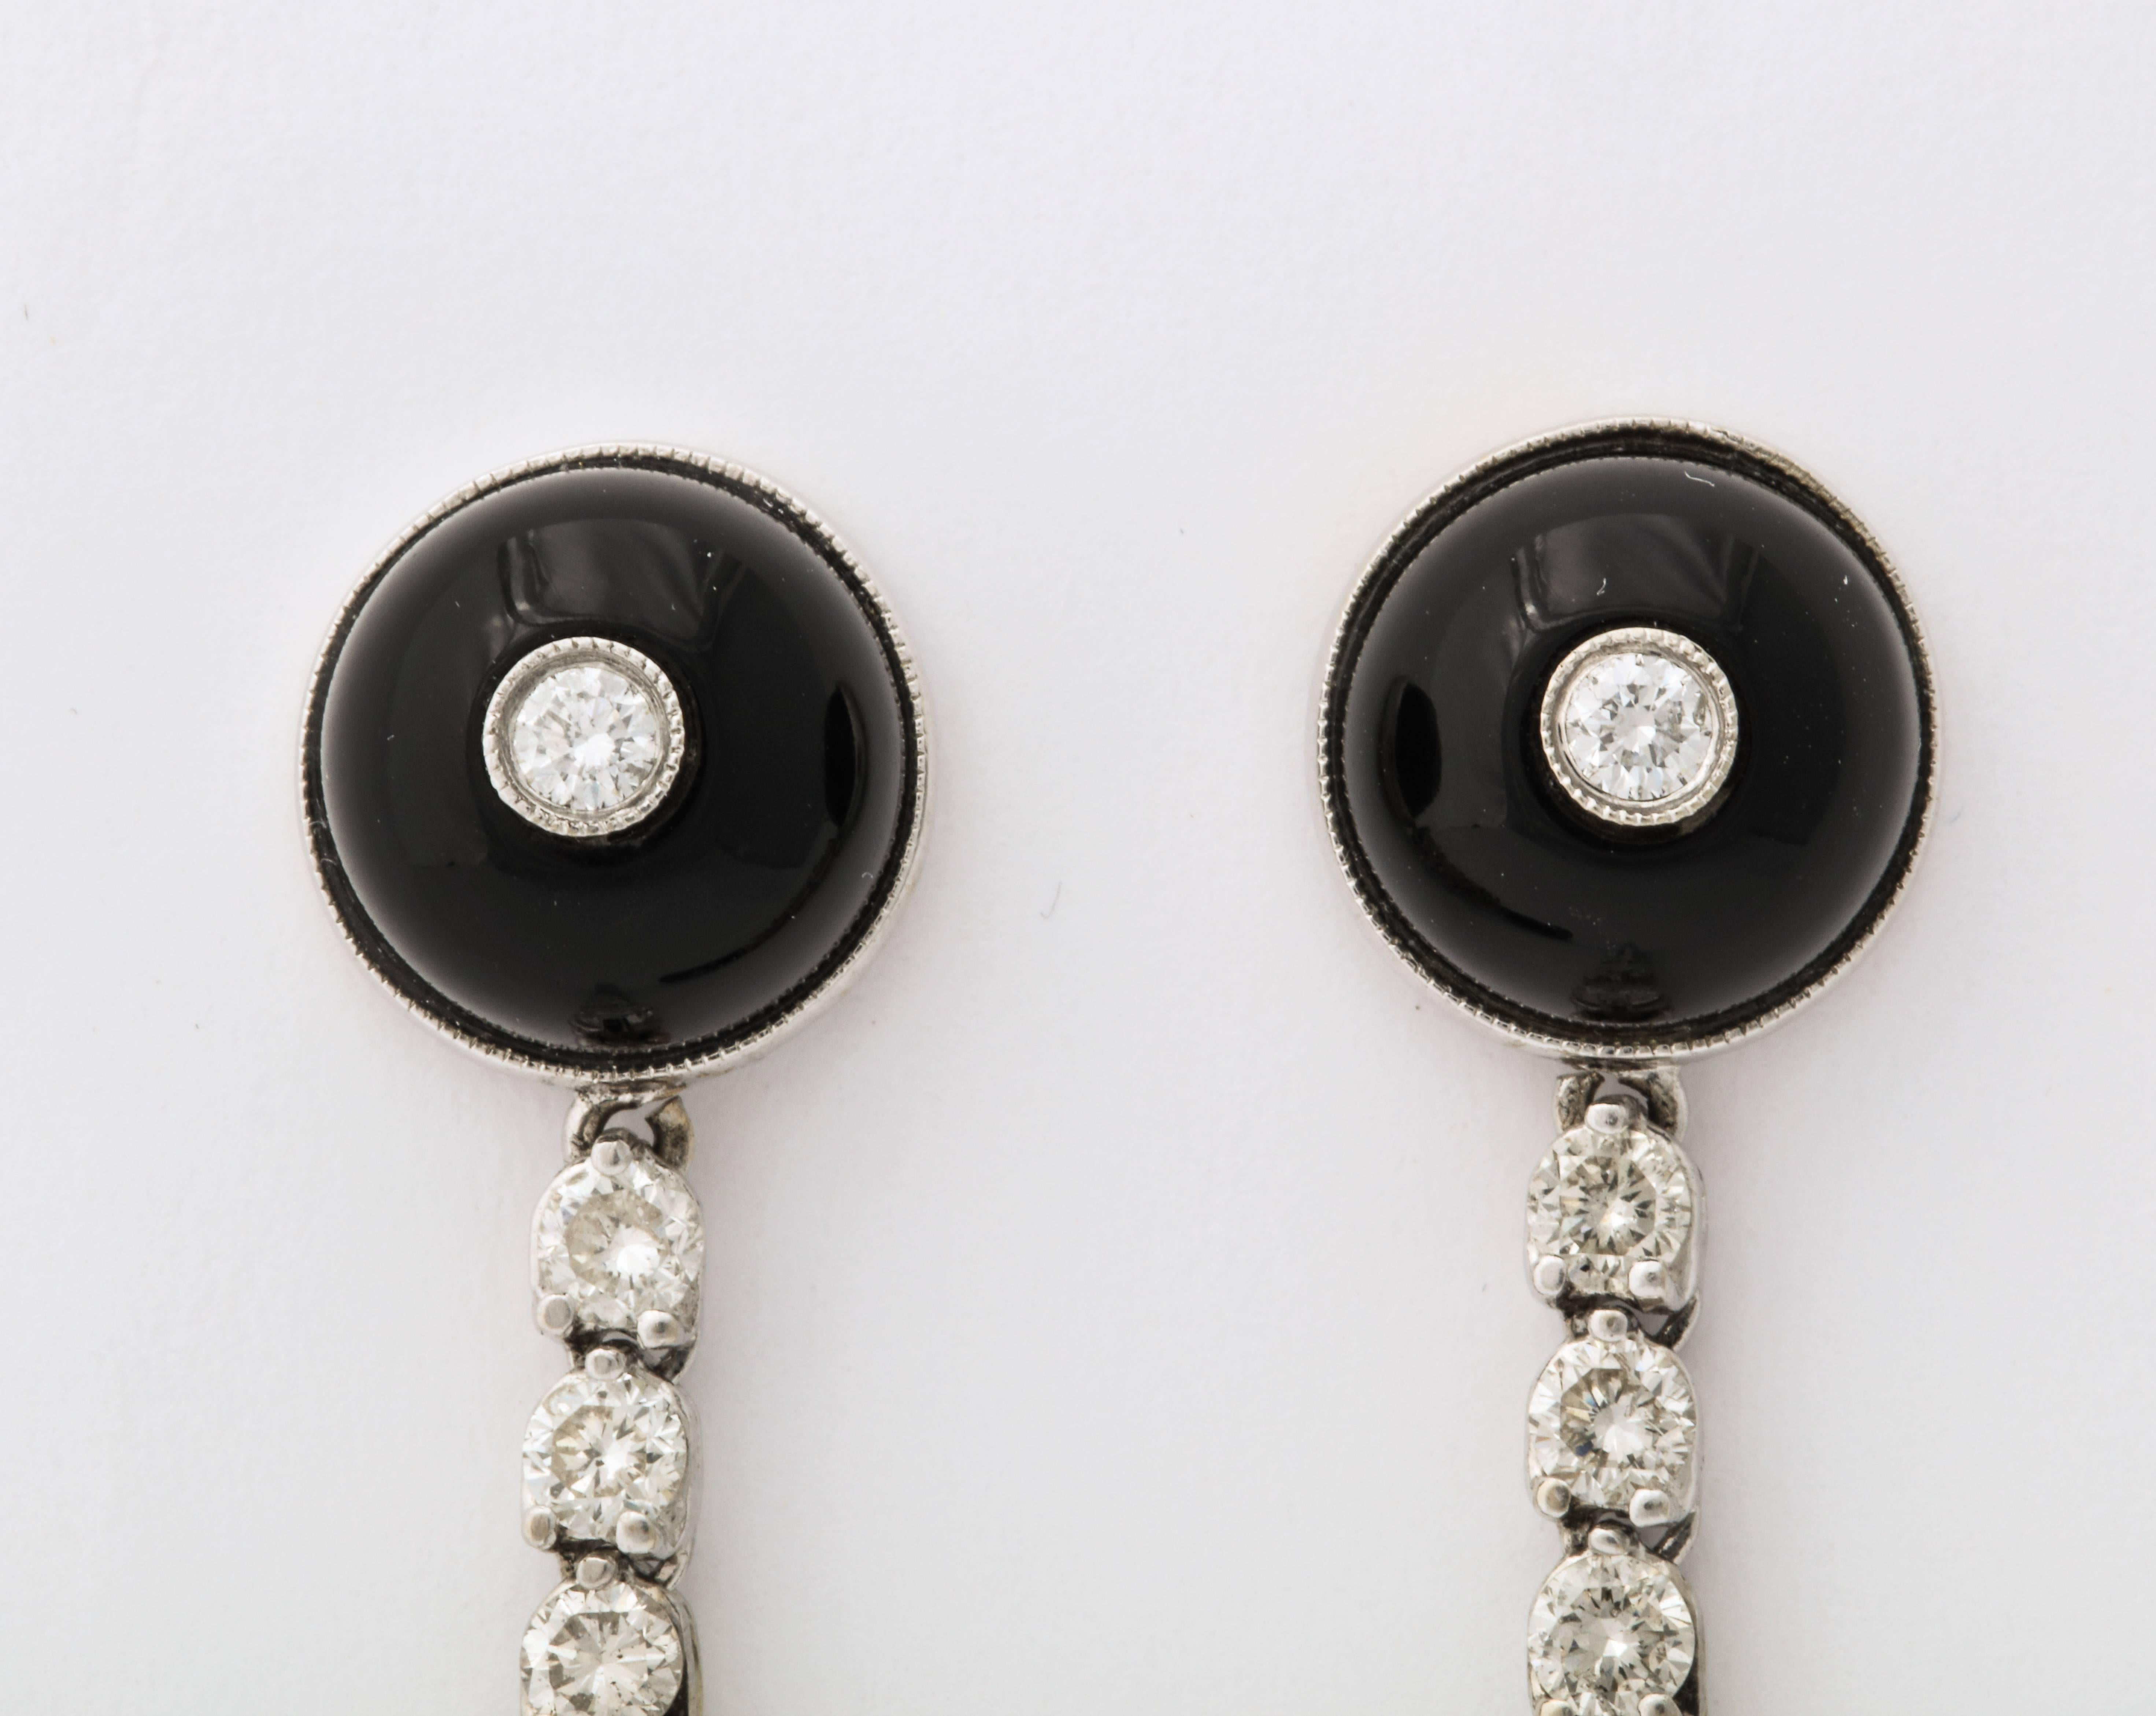 A stunning  pair of French Art Deco onyx and diamond drop earrings. A onyx stud with a diamond holds a chain of round diamonds set in platinum and ending in onyx teardrop pendants. 